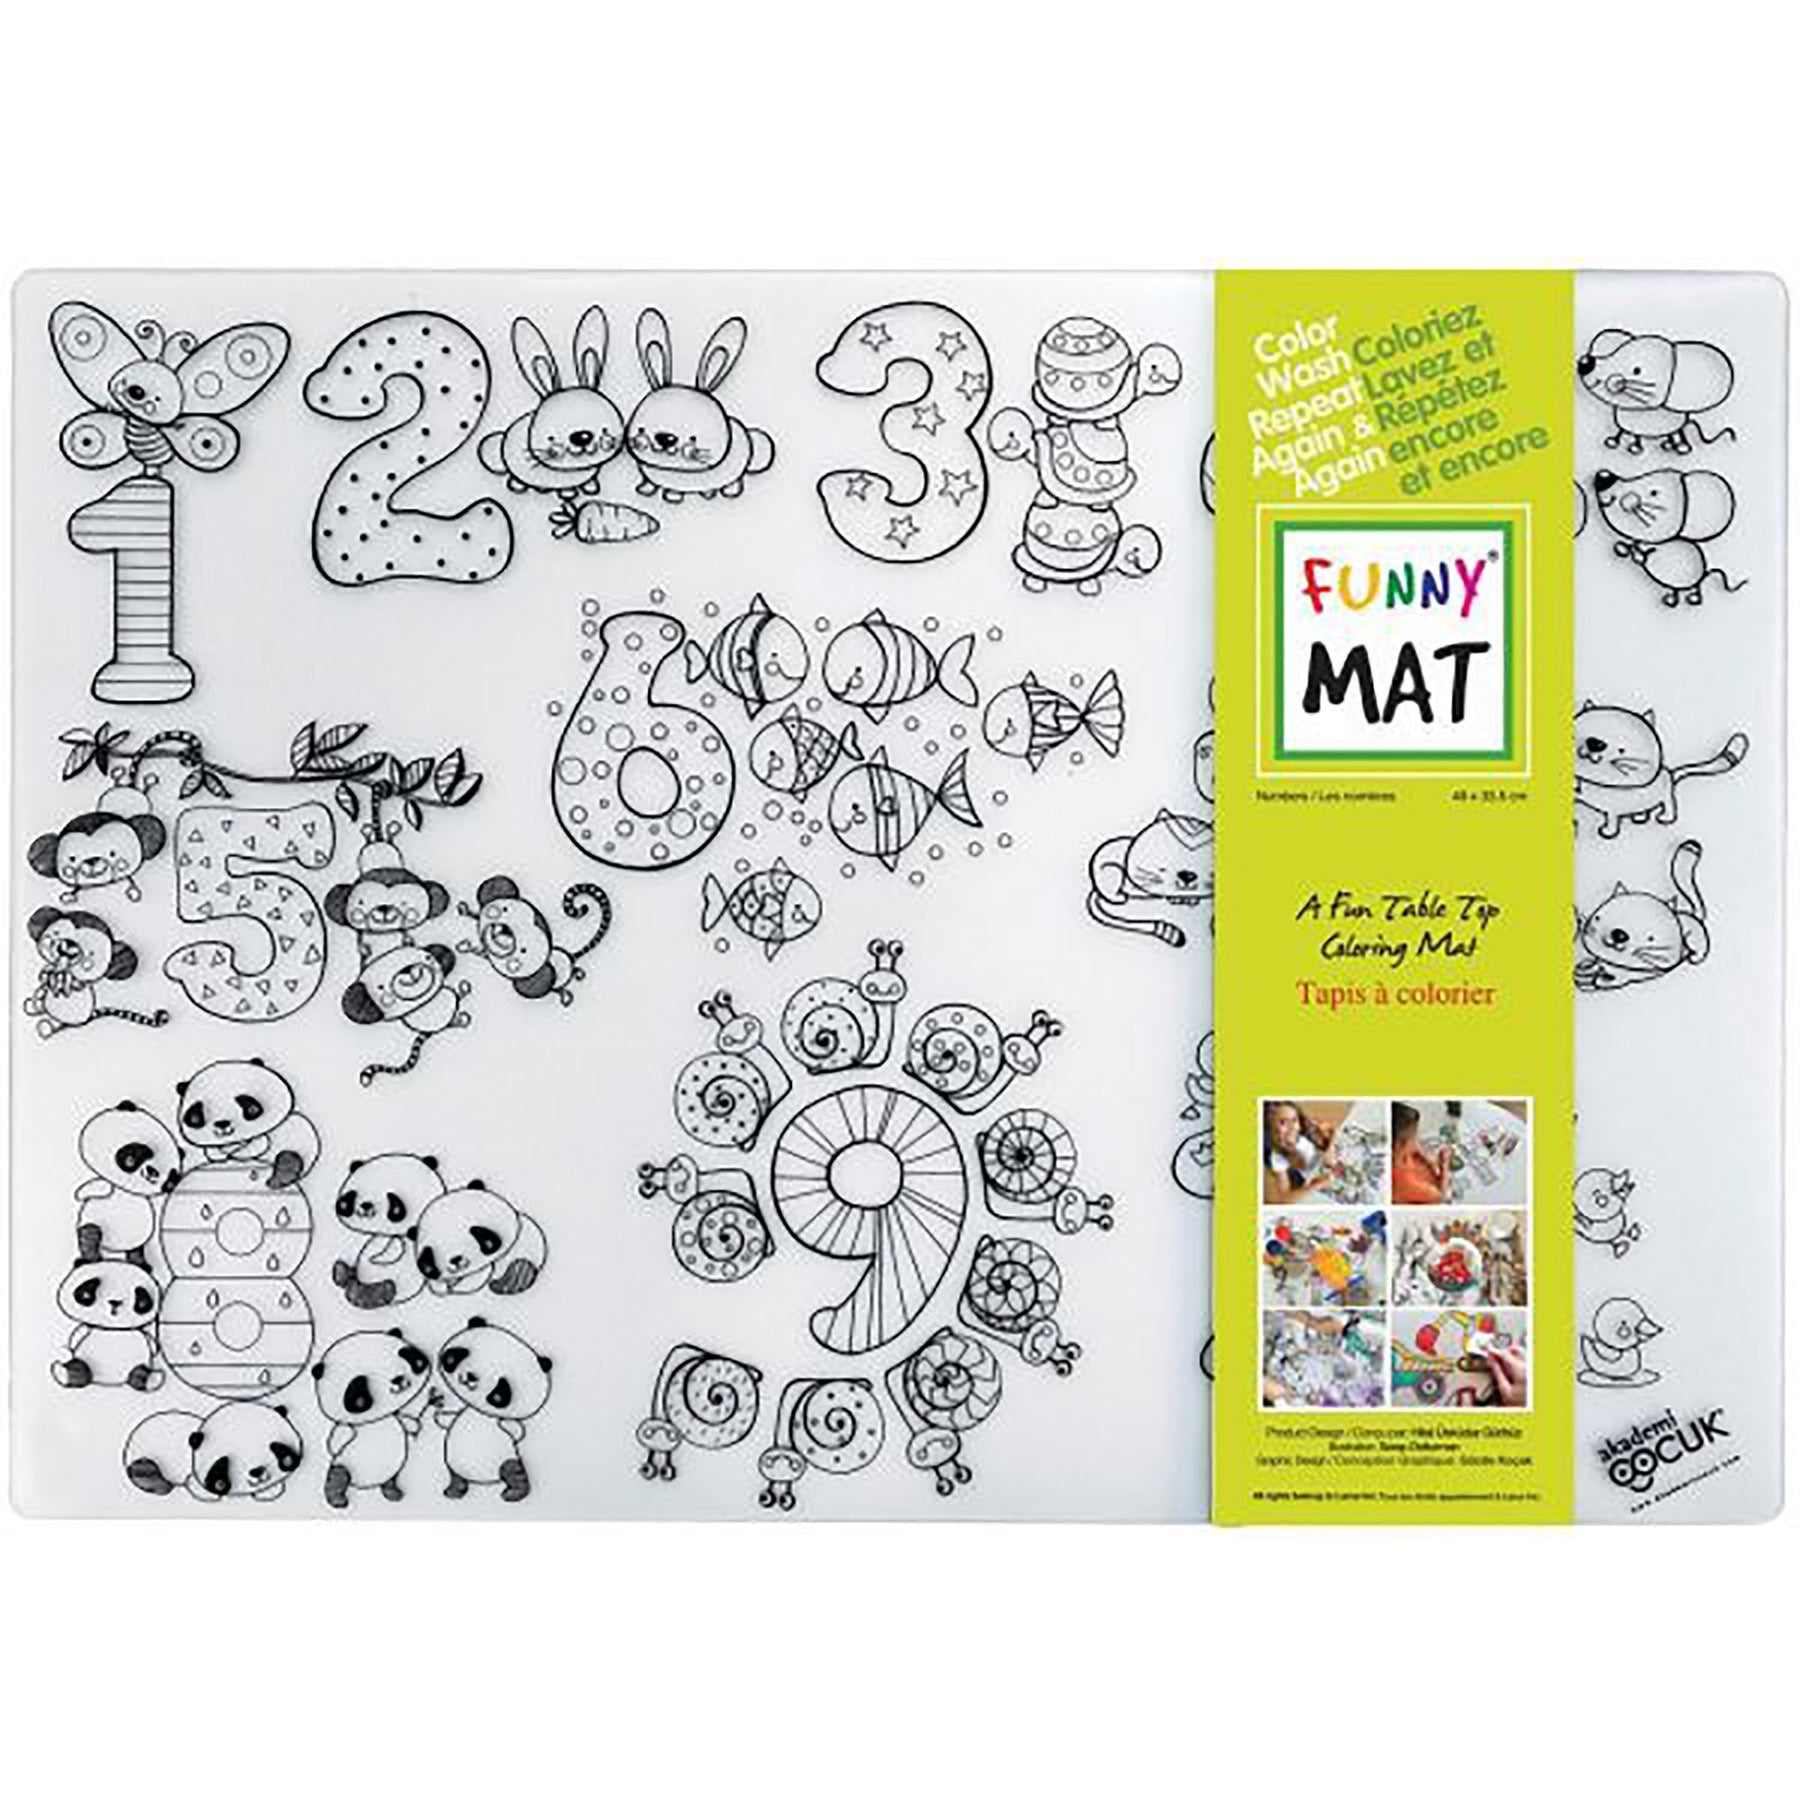 Funny Mat Coloring Placemat - Number 18.9x13.2in